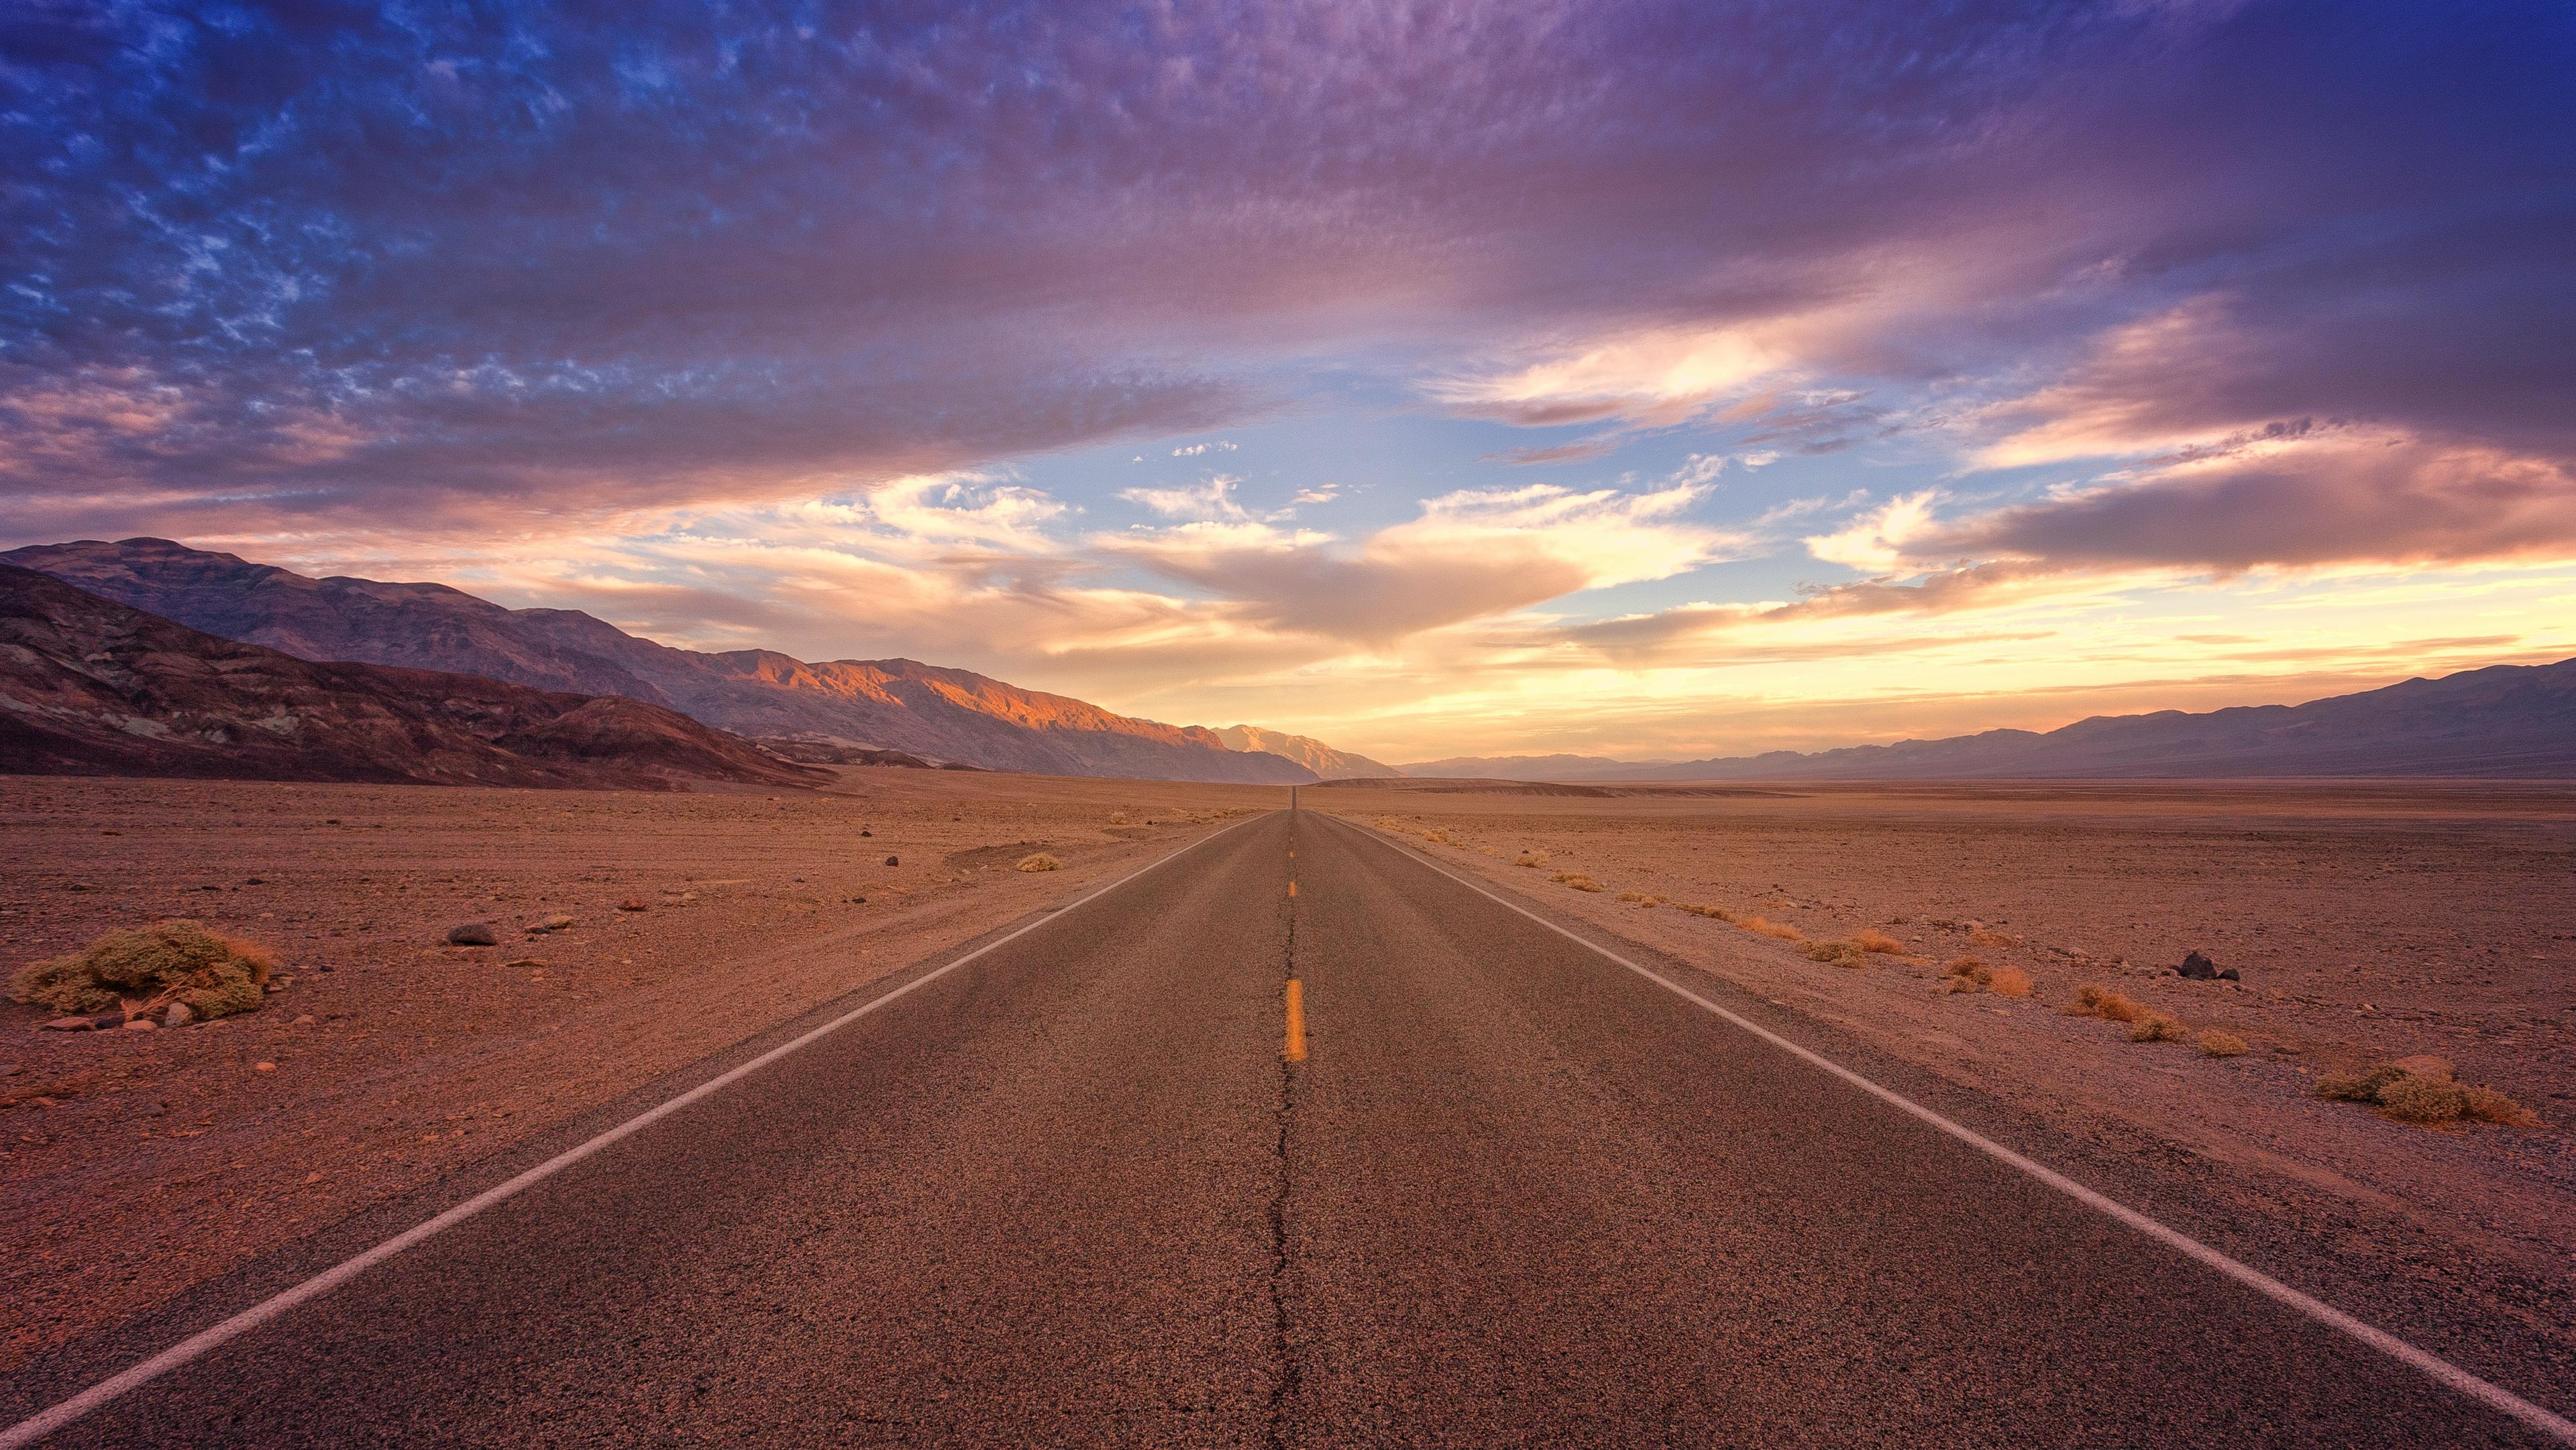 The open road in Death Valley.